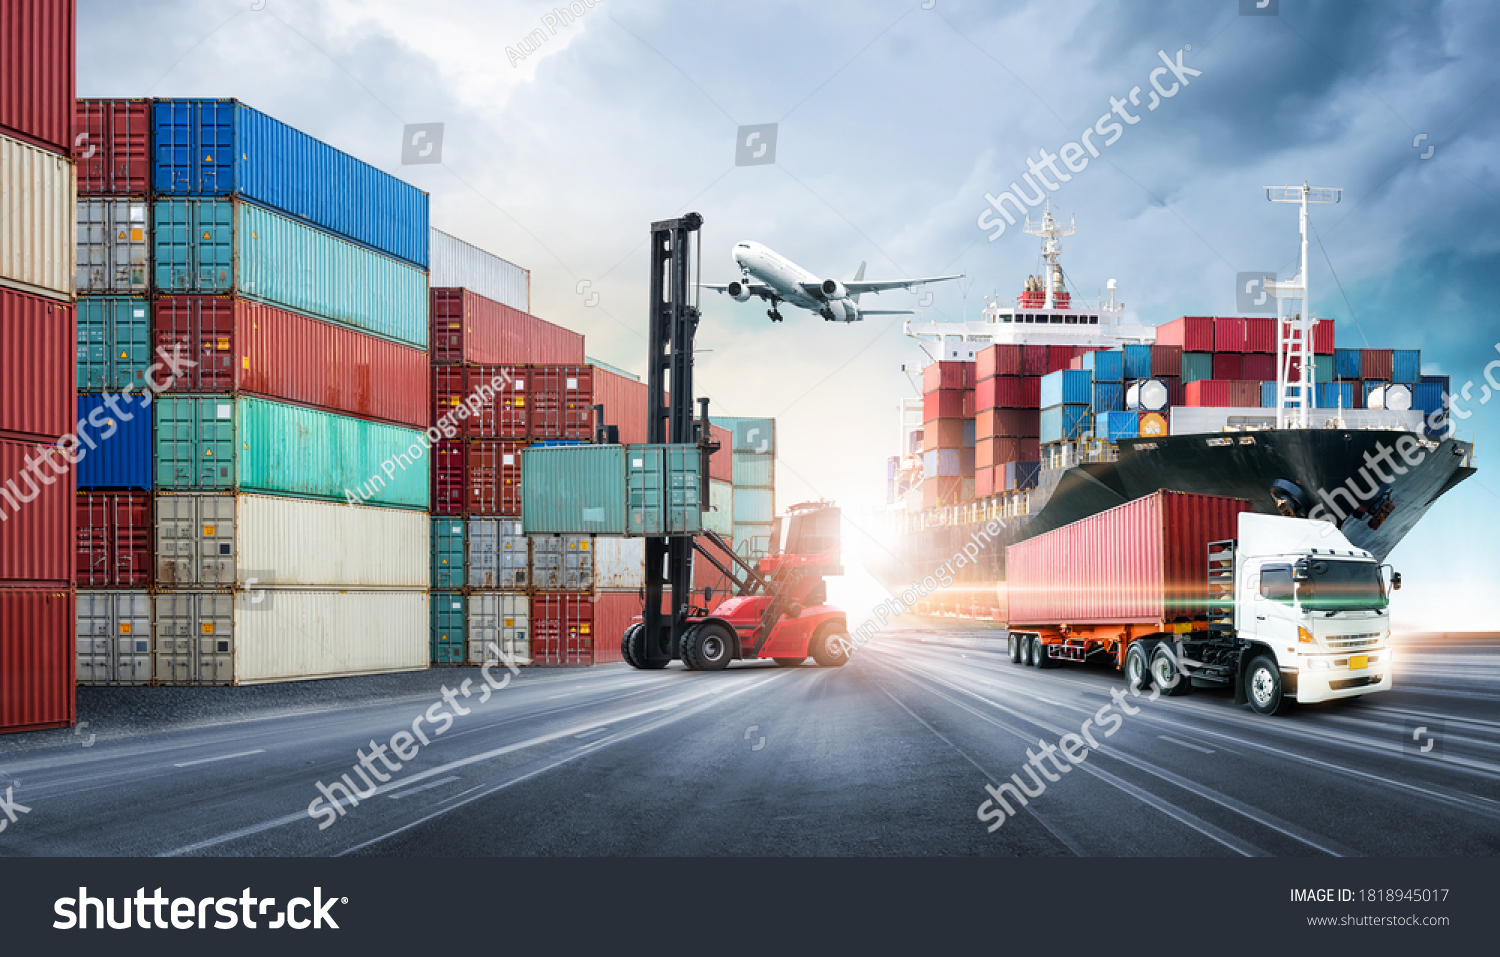 Business logistics and transportation concept of containers cargo freight ship and cargo plane in shipyard at dramatic blue sky, logistic import export and transport industry background #1818945017